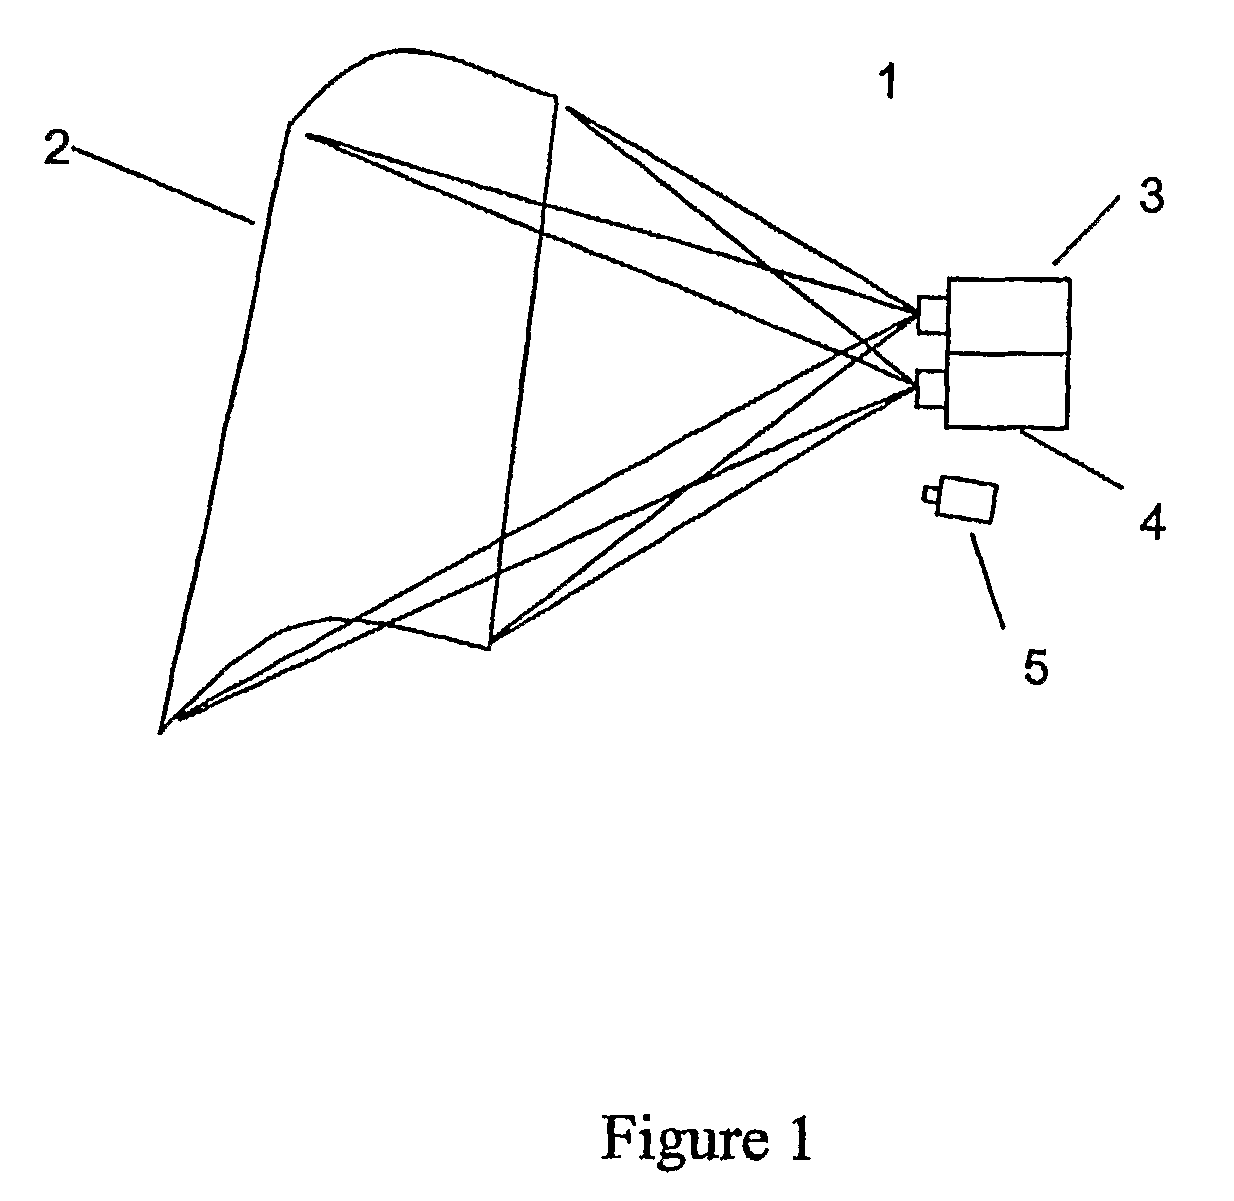 Systems and methods for projecting composite images